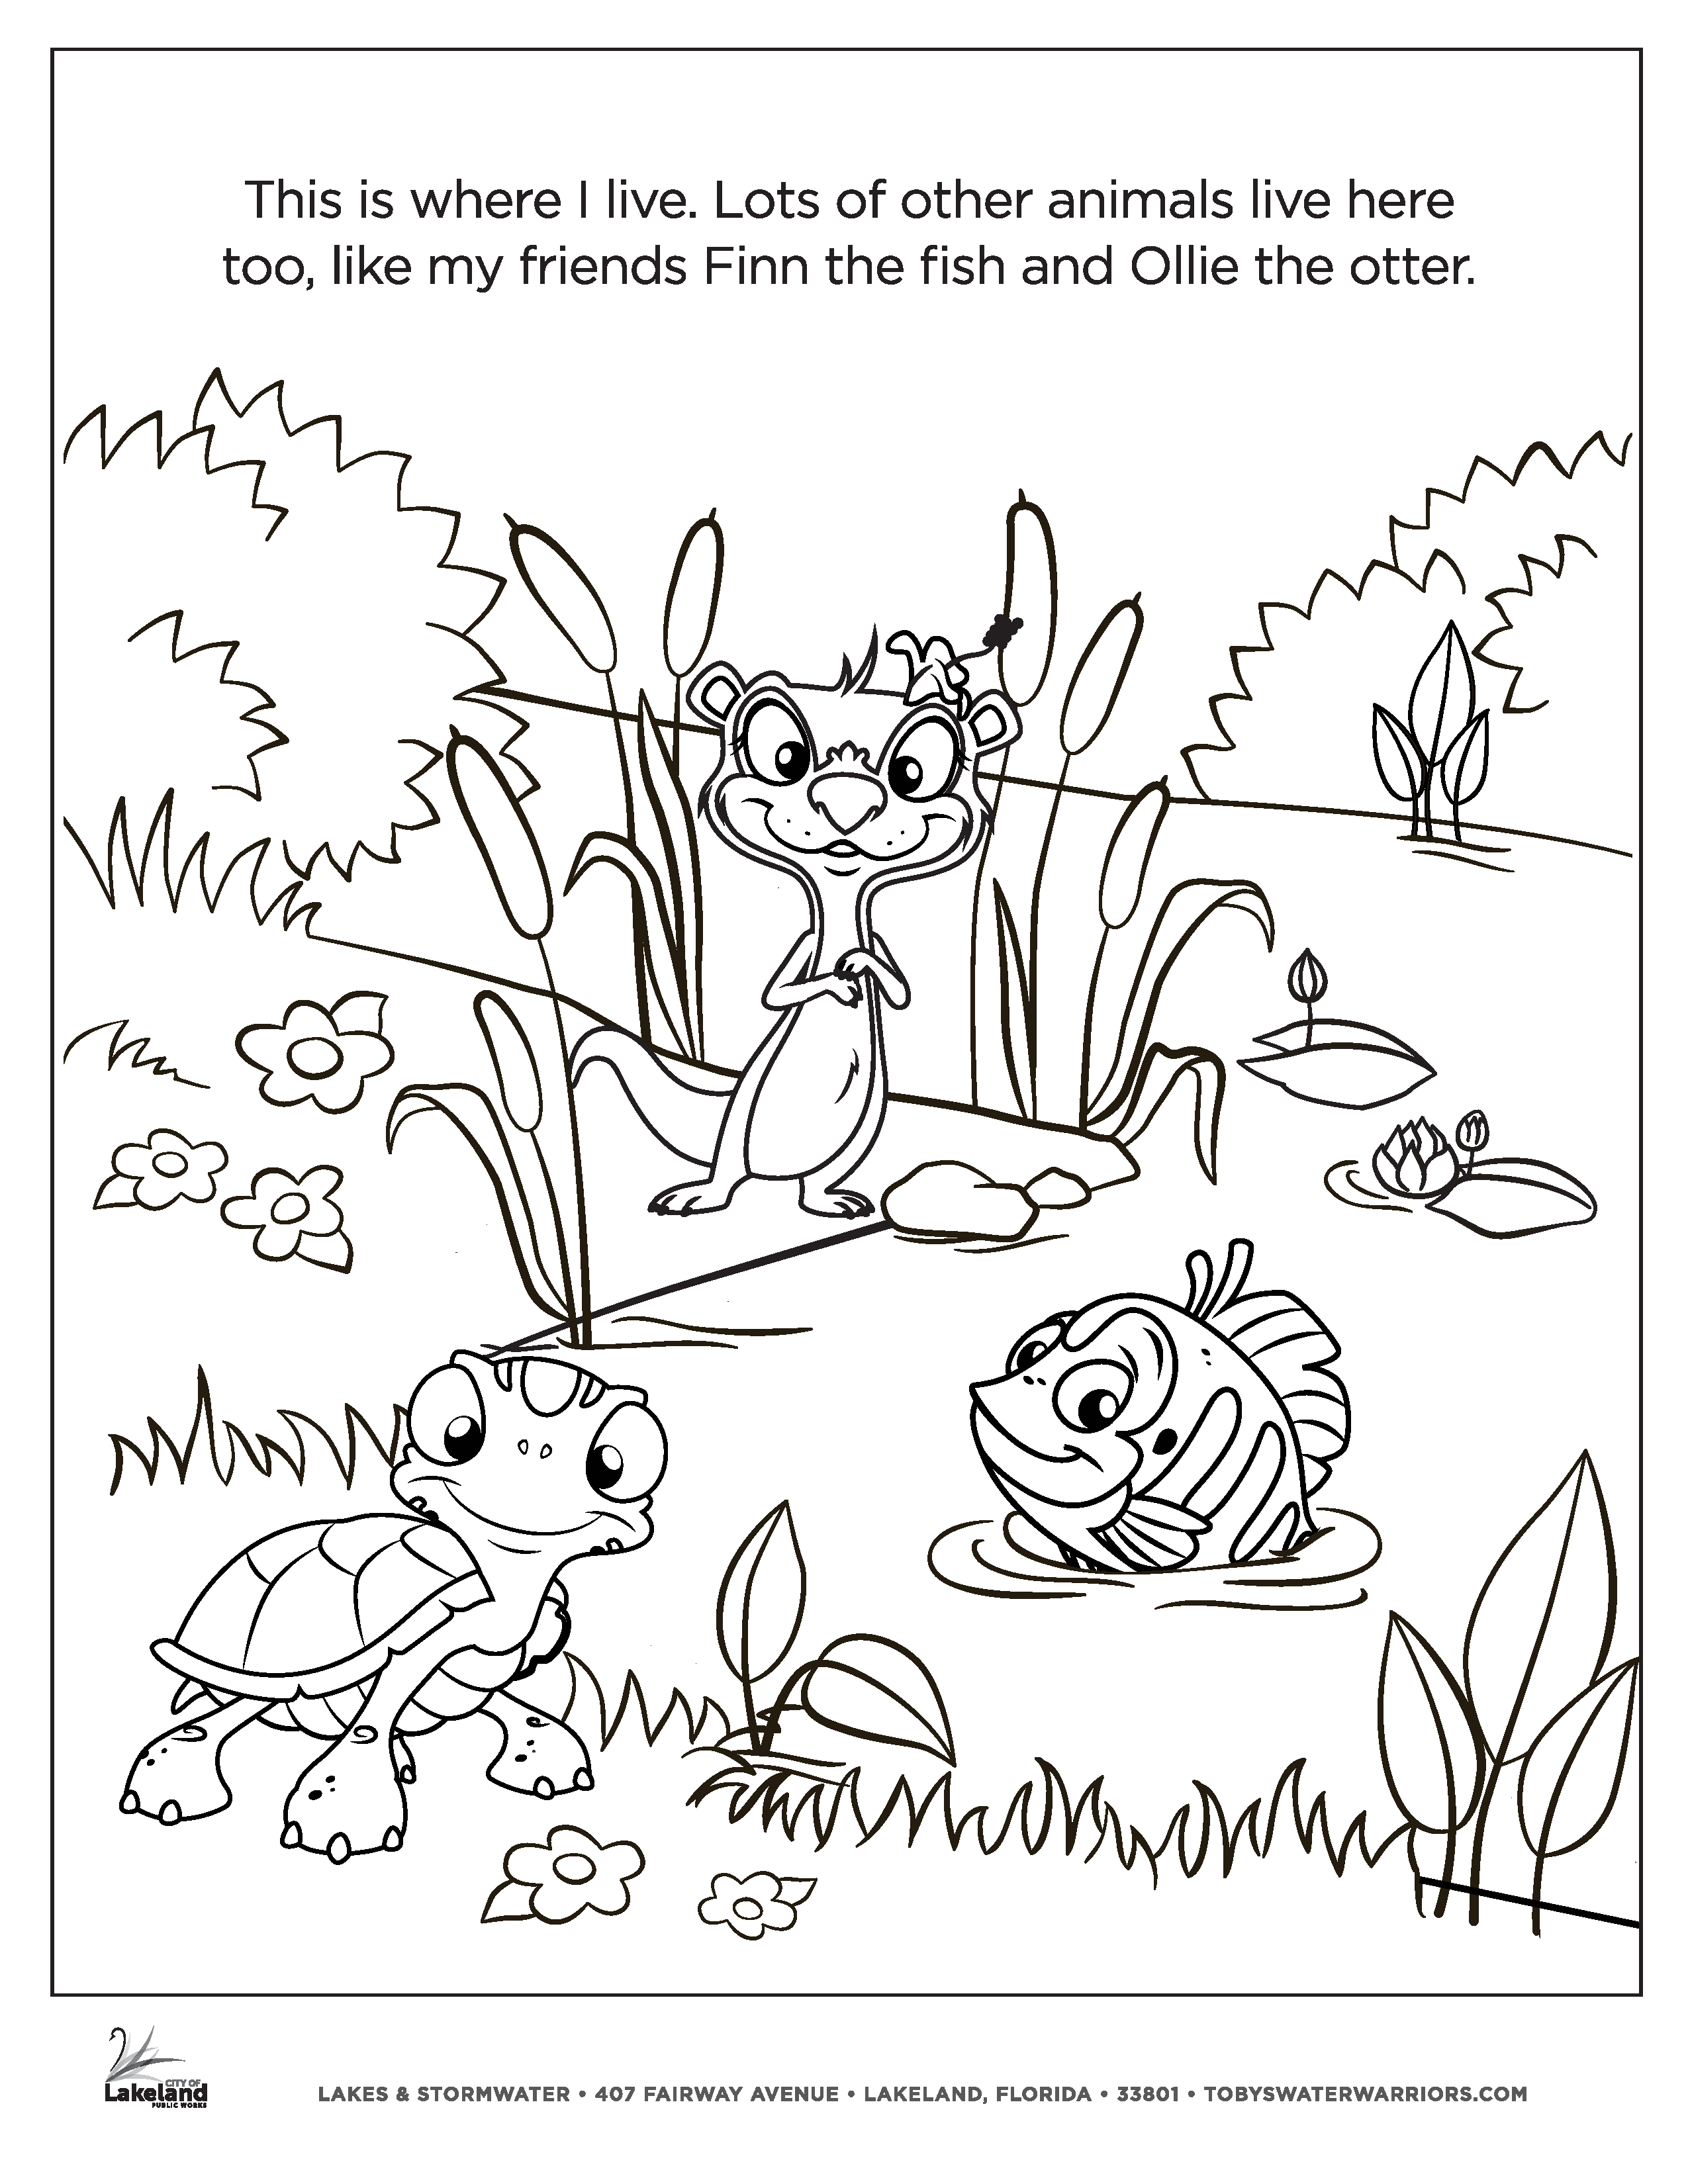 Take your #coloring adventure to the next level with watercolor! The  Frogs…